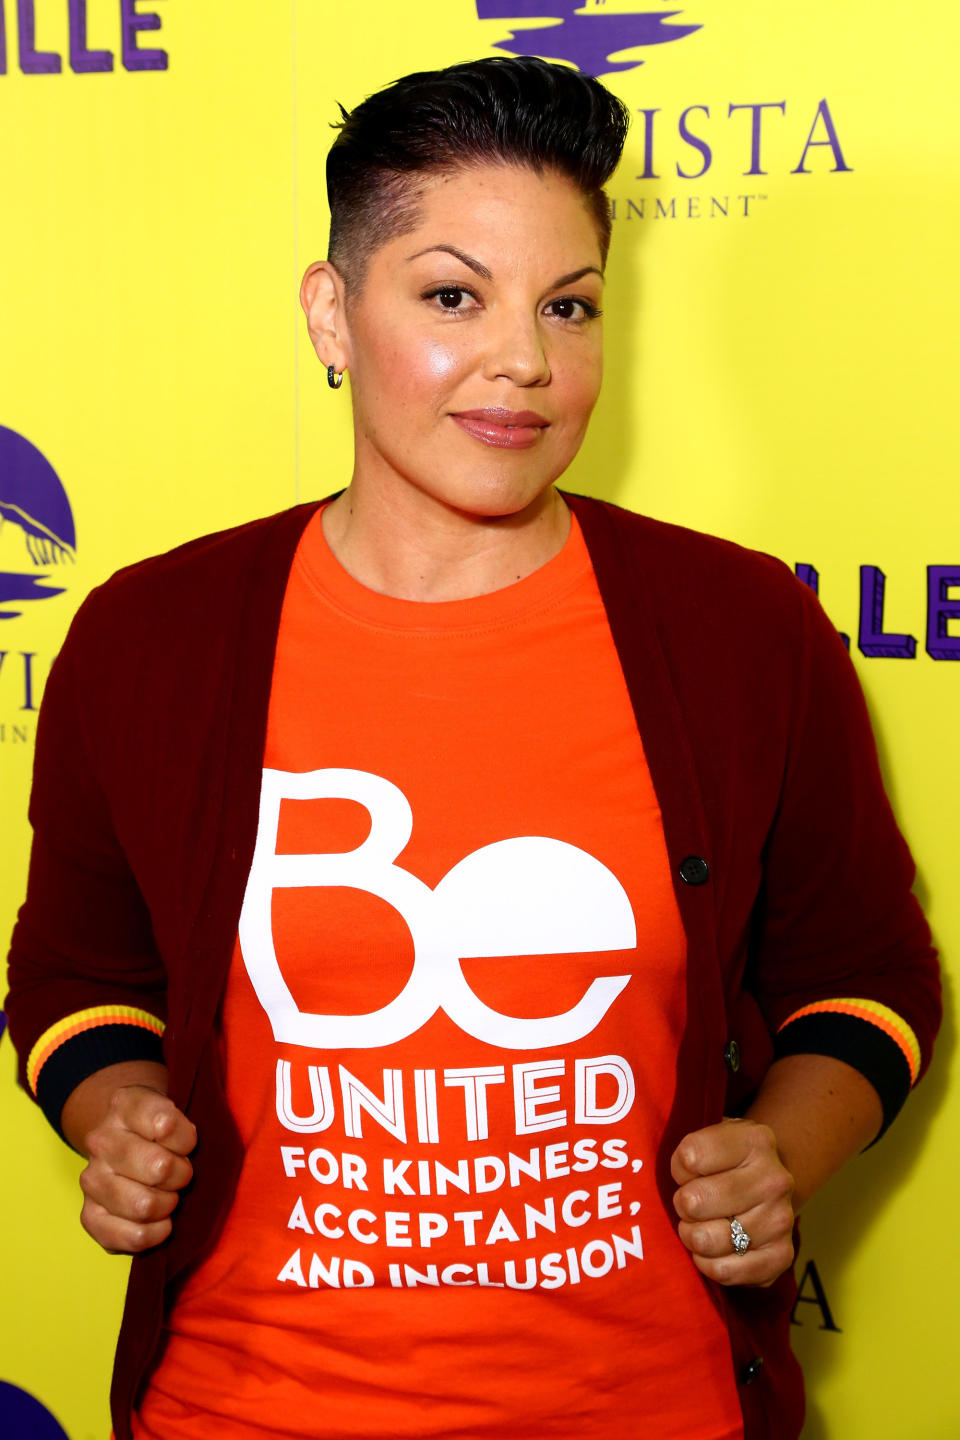 The "Grey's Anatomy" star <a href="http://www.newnownext.com/sara-ramirez-bisexual/10/2016/" target="_blank">came out as bi</a> ahead of 2016's National Coming Out Day in a speech addressing homeless LGBT youth in October.&nbsp;<br /><br />"[B]ecause of the intersections that exist in my own life: Woman, multi-racial woman, woman of color, queer, bisexual, Mexican-Irish American, immigrant, and raised by families heavily rooted in Catholicism on both my Mexican and Irish sides, I am deeply invested in projects that allow our youth&rsquo;s voices to be heard, and that support our youth in owning their own complex narratives so that we can show up for them in the ways they need us to.&rdquo;